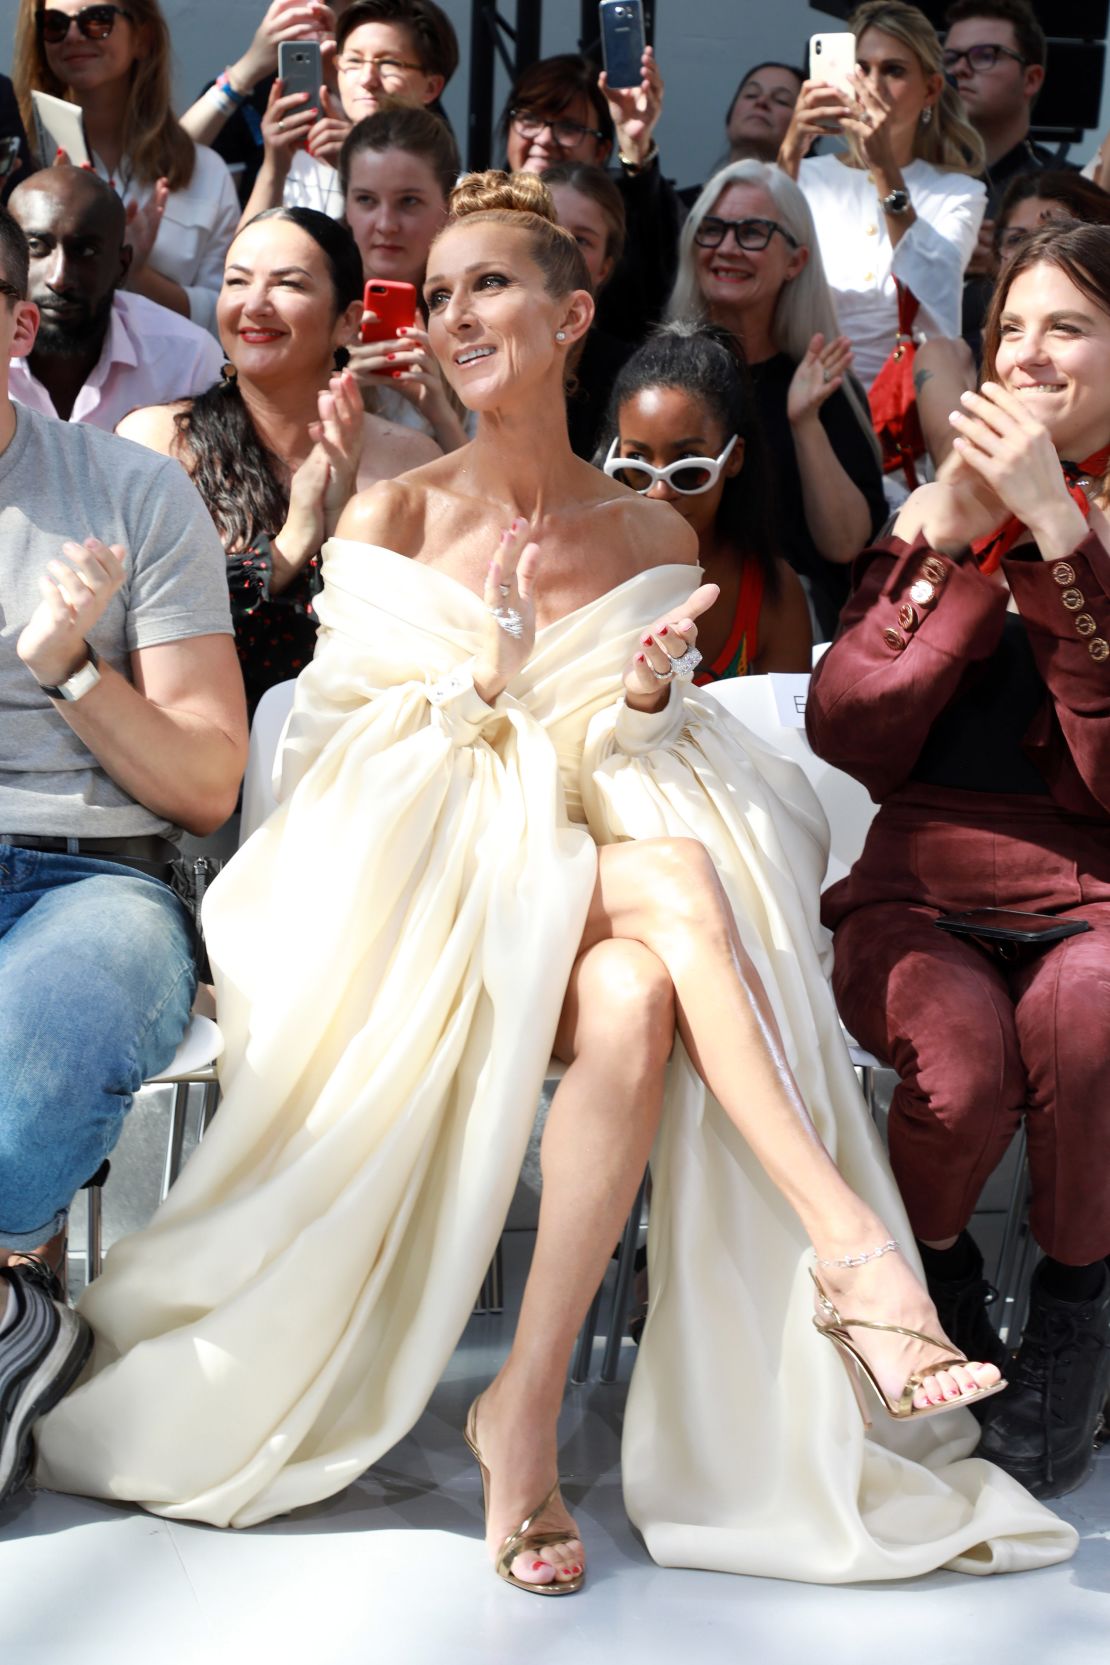 Celine Dion's outfits take Paris Fashion Week by storm